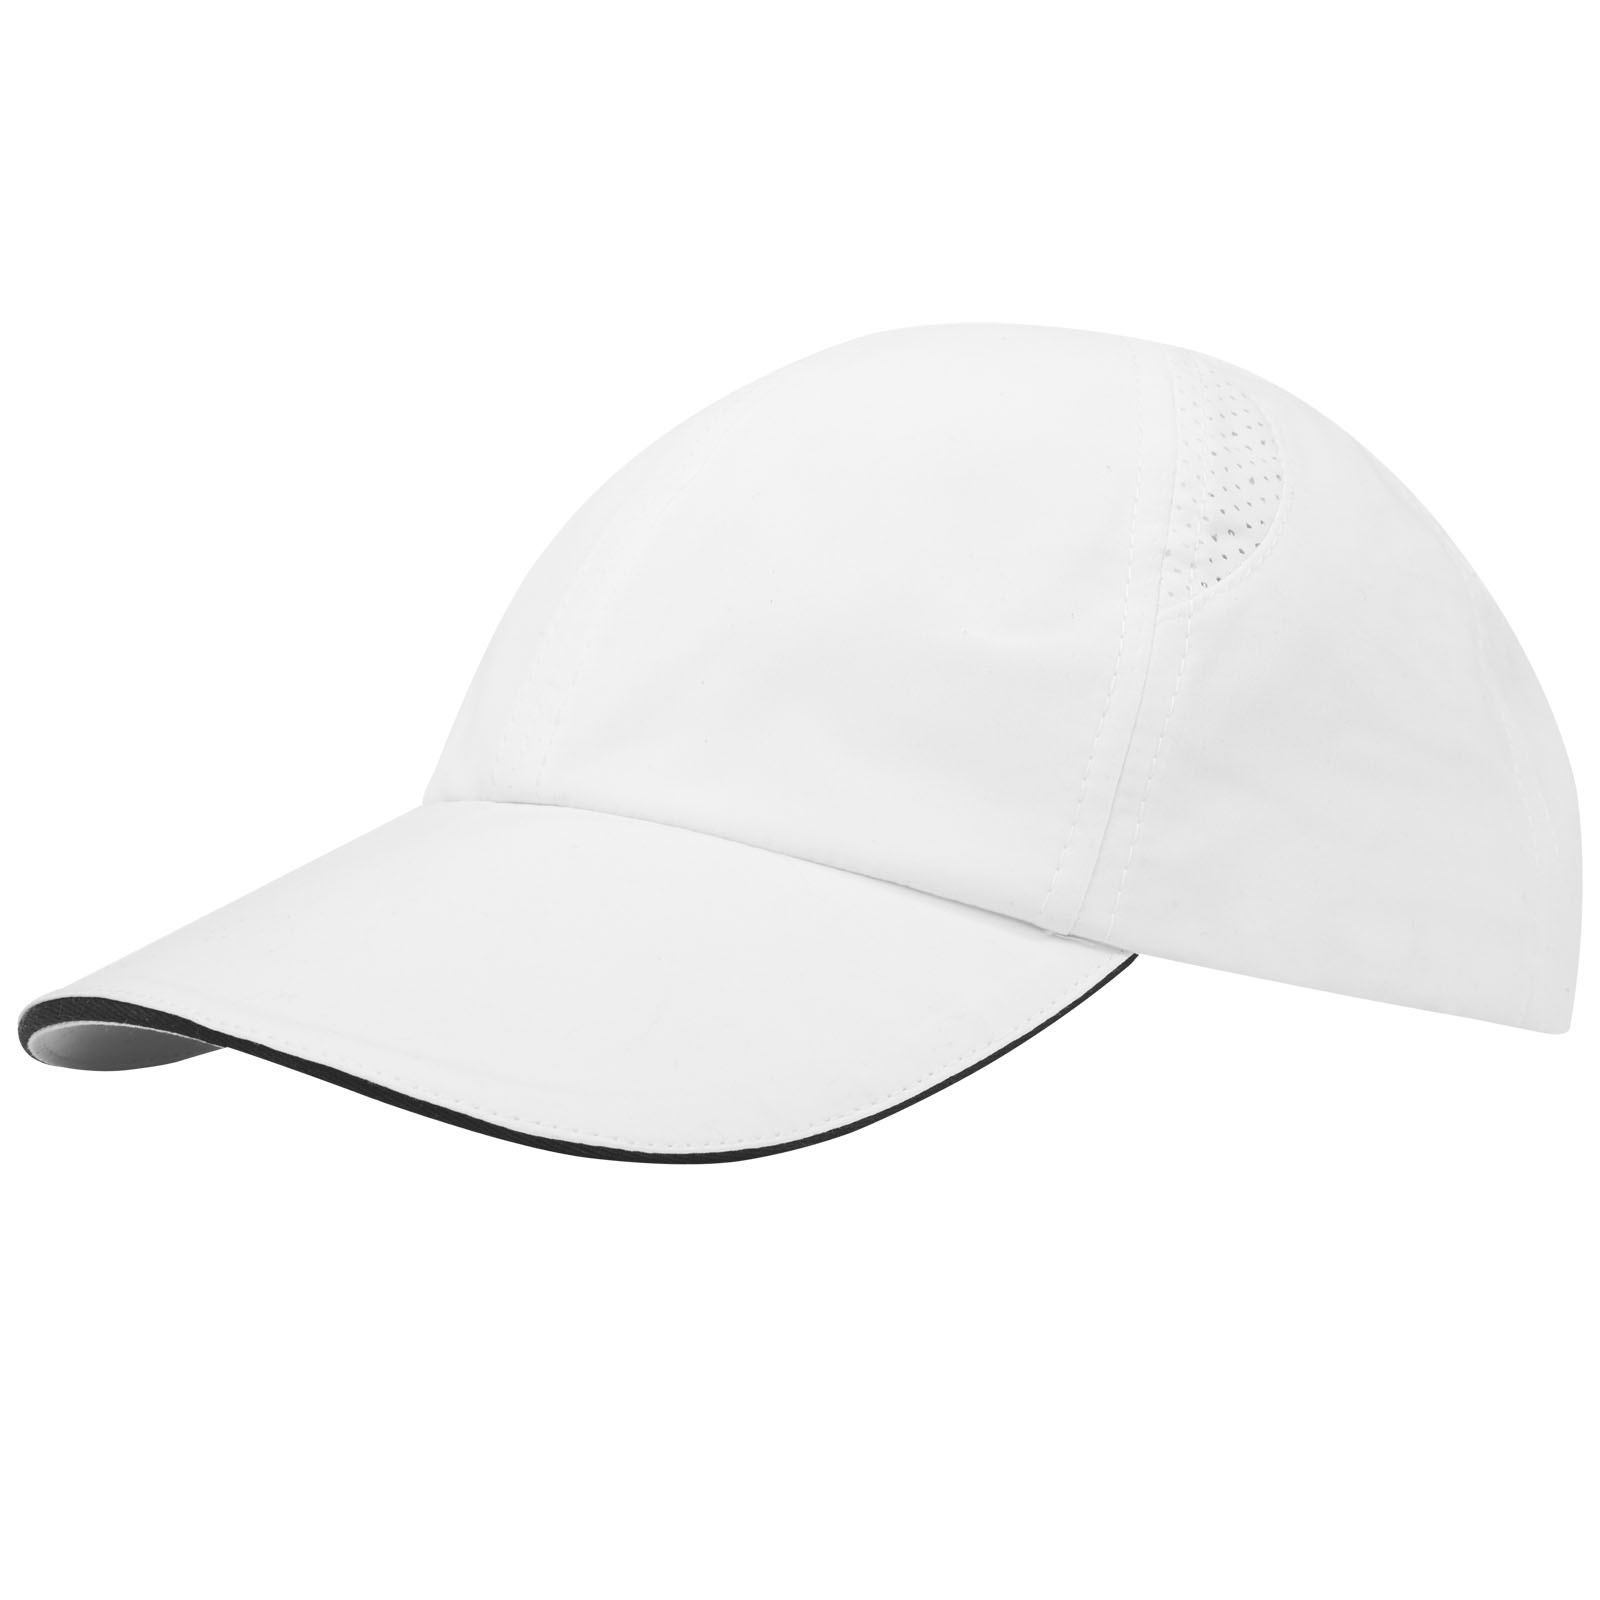 Caps & Hats - Morion 6 panel GRS recycled cool fit sandwich cap